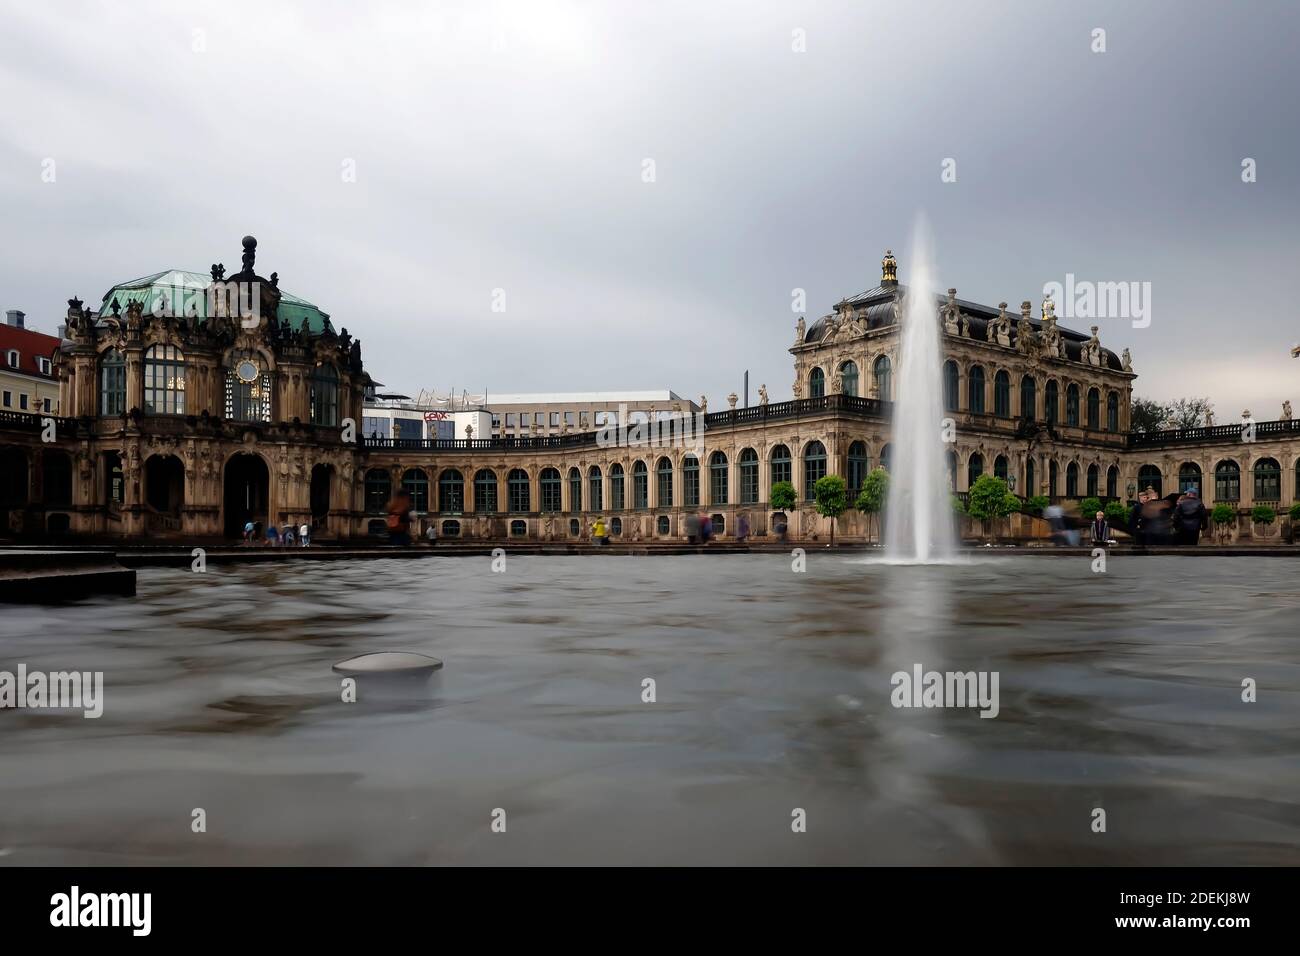 Famous Zwinger palace (Der Dresdner Zwinger) Art Gallery of Dresden, Saxony, Germany Stock Photo